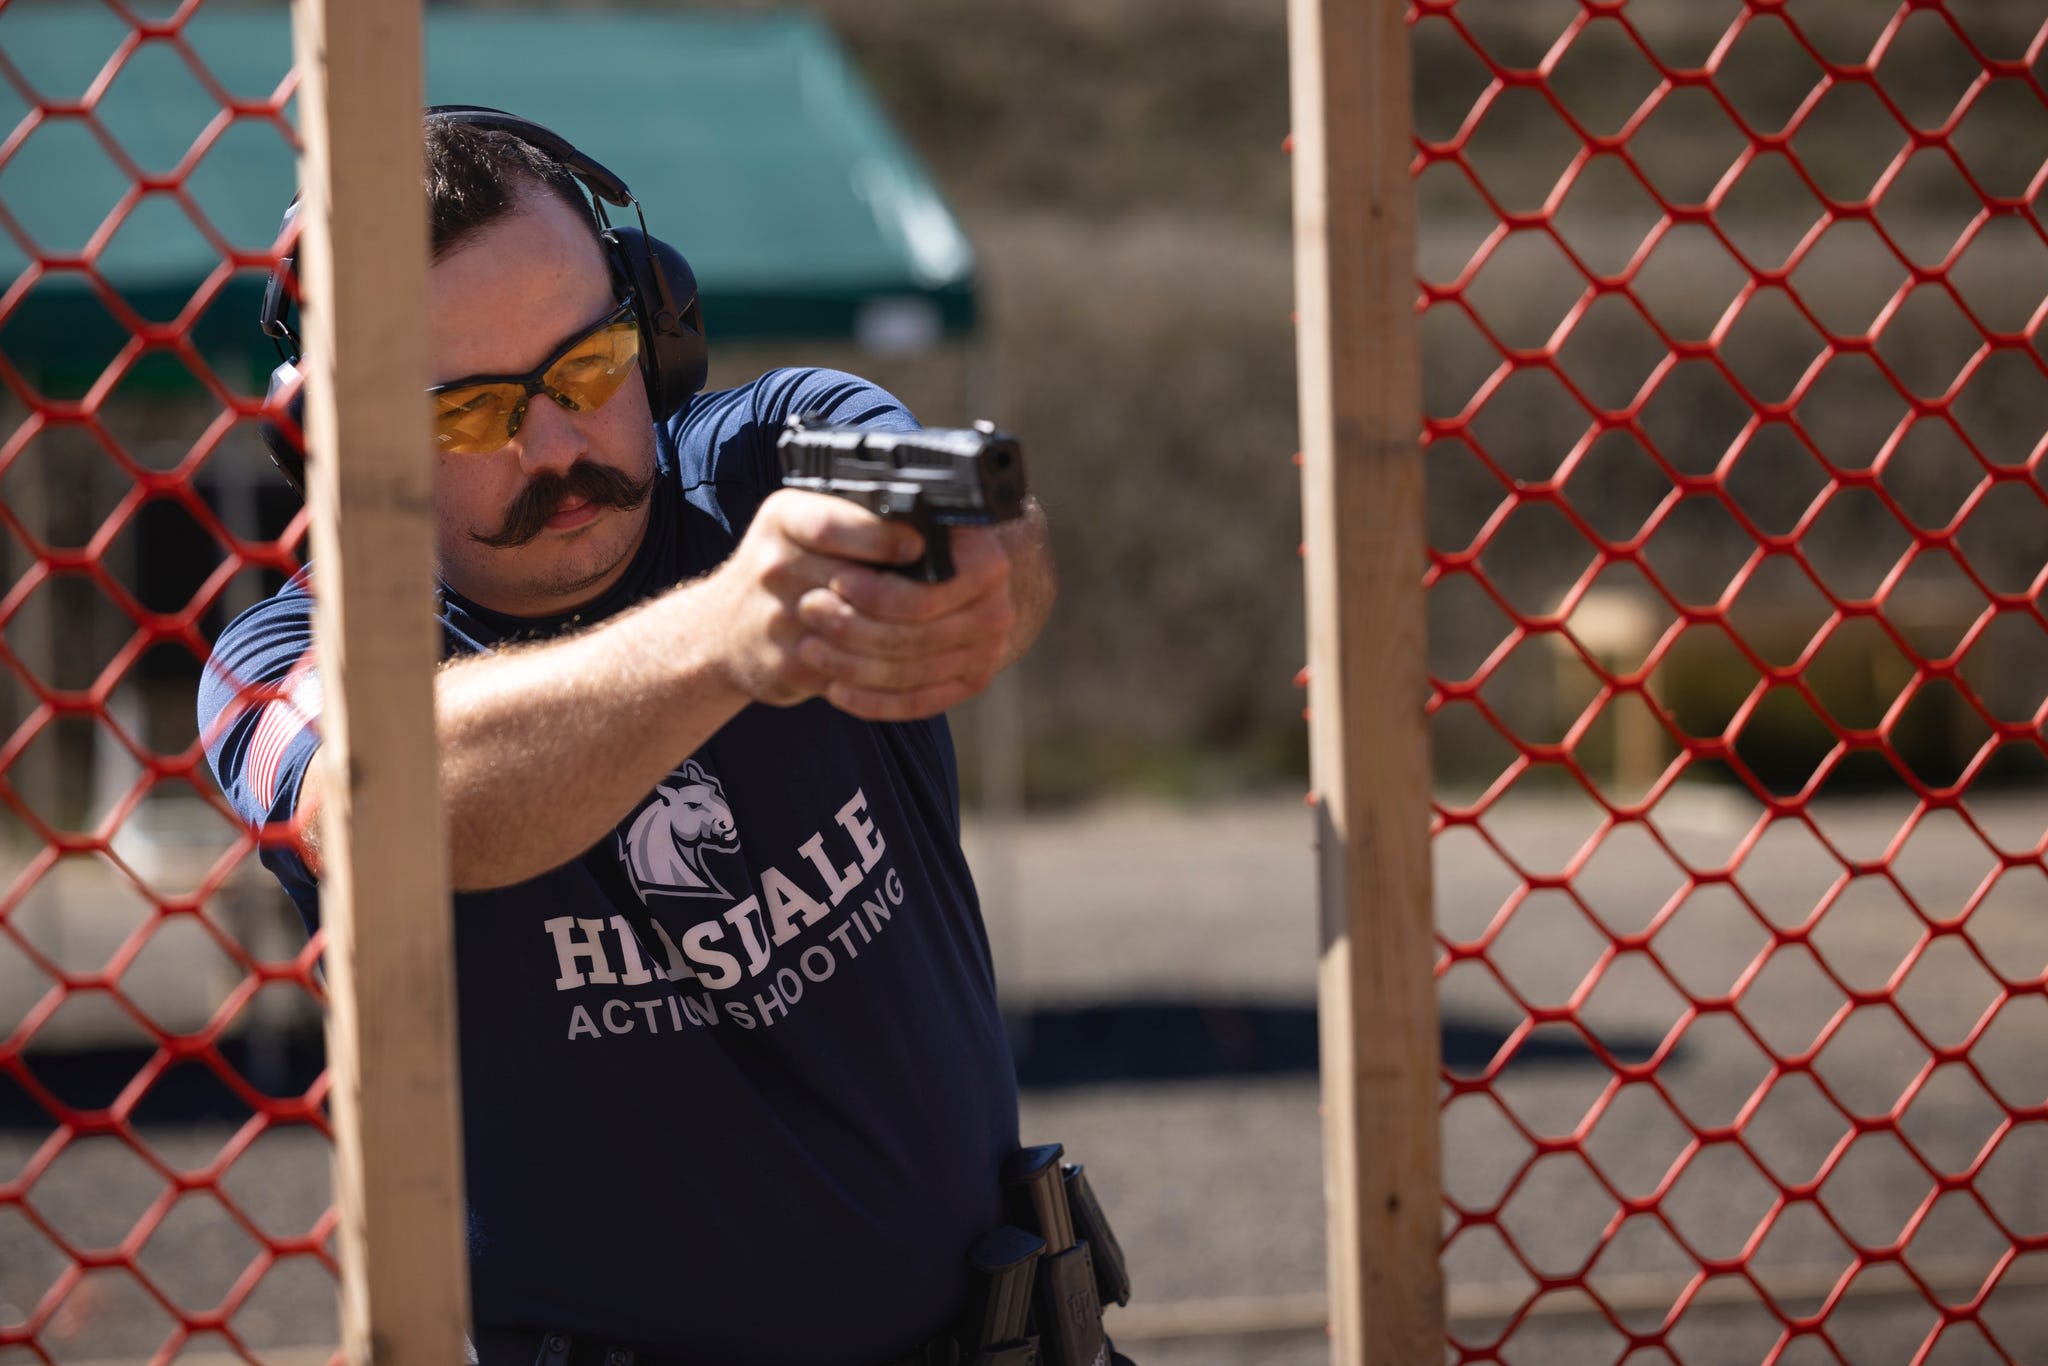 Halter Shooting Sports Education Center to offer concealed pistol license classes